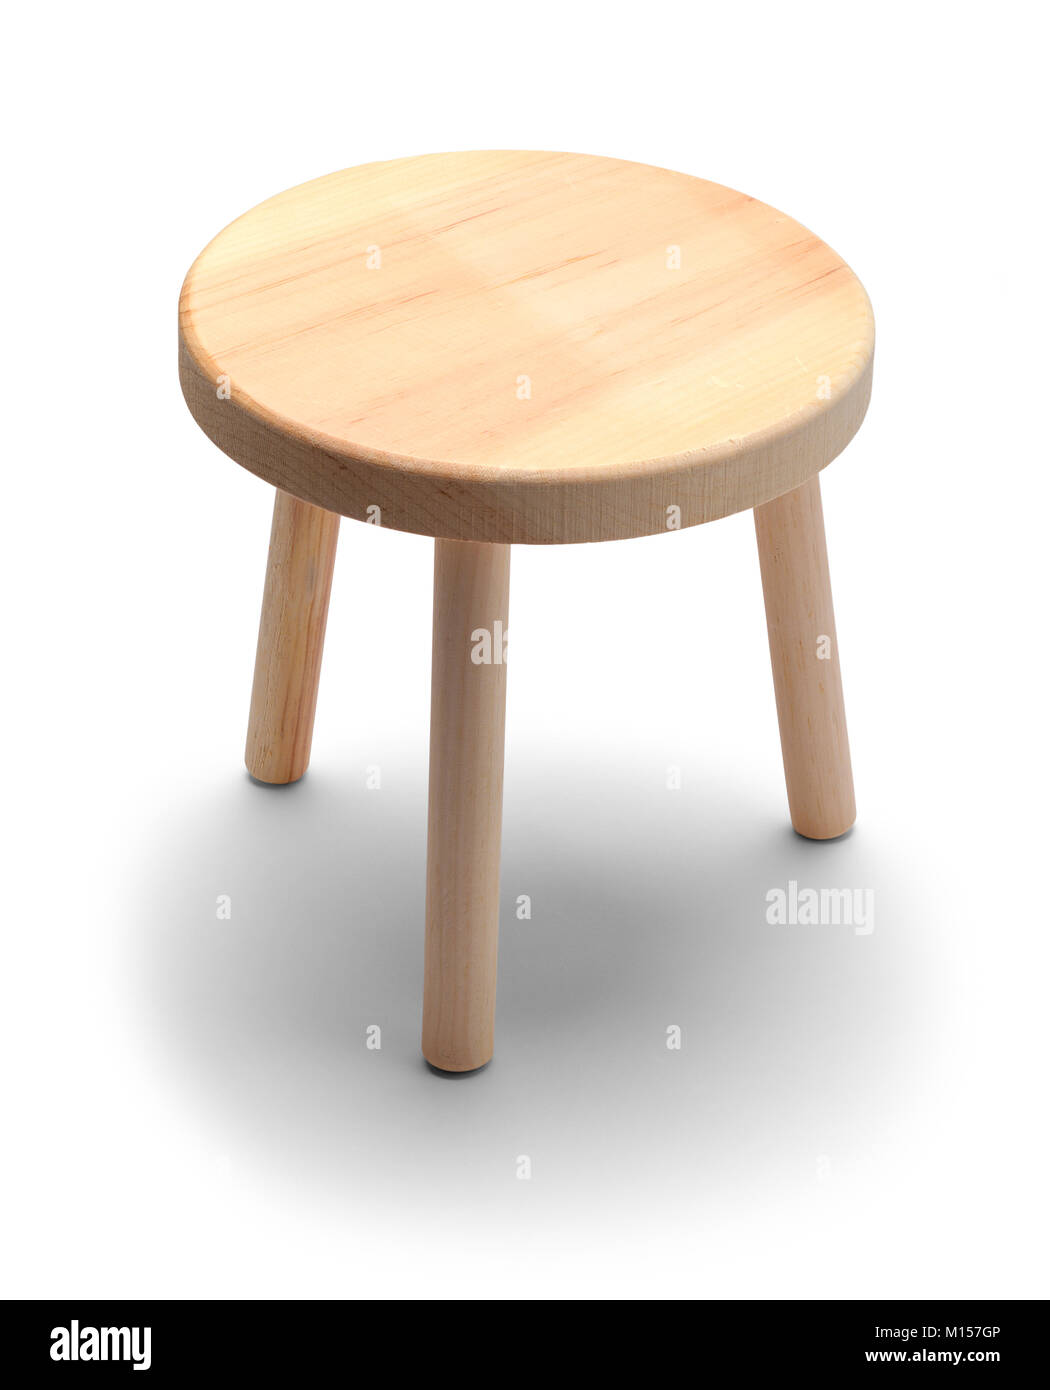 Small Round Foot Stool Isolated on a White Background. Stock Photo